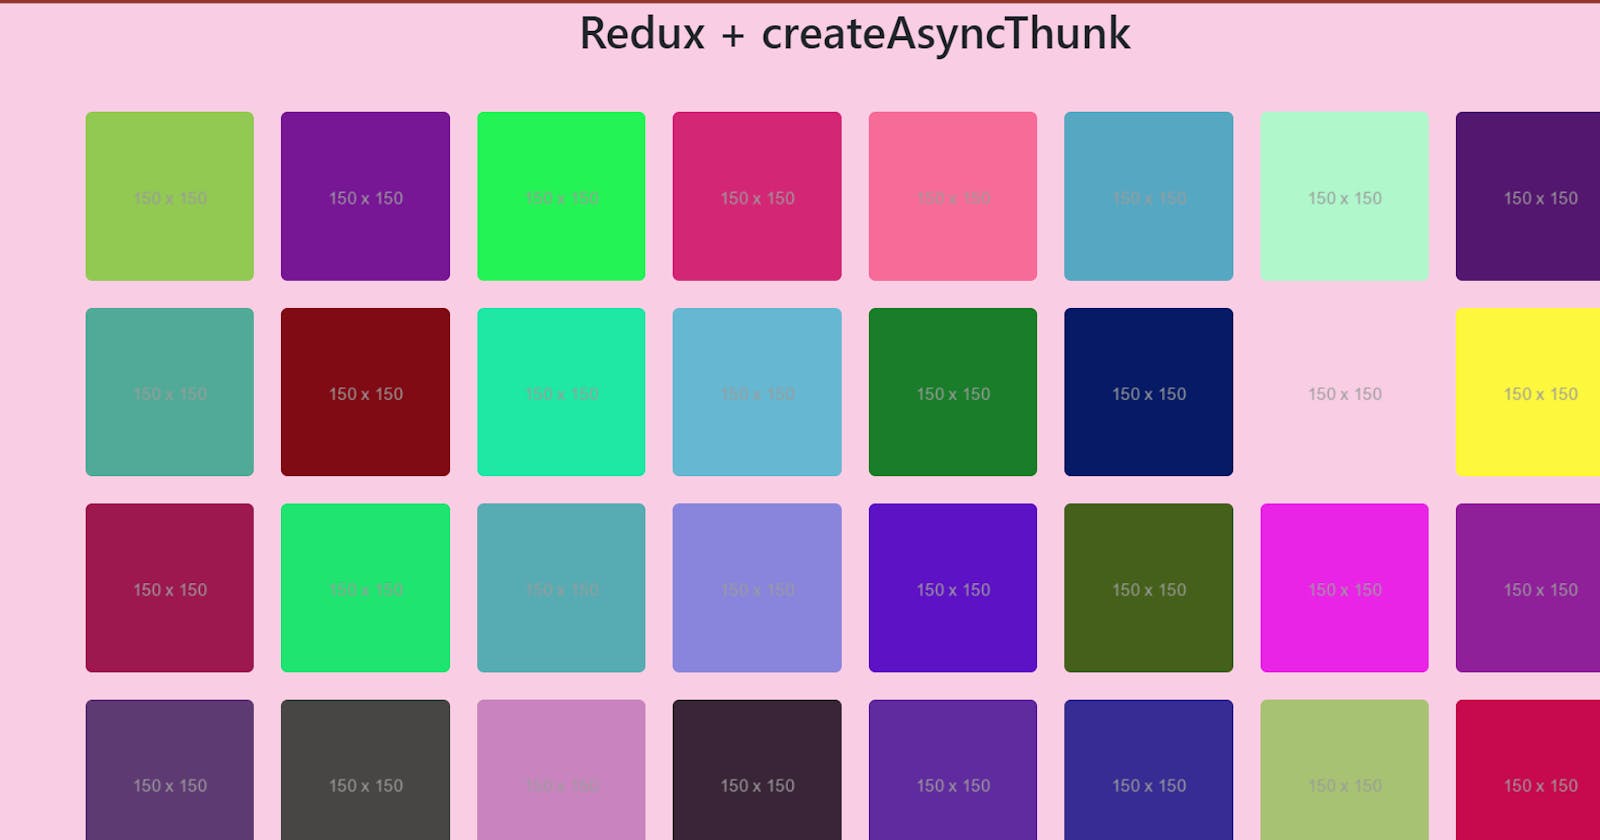 Simplify Async Actions in Redux with createAsyncThunk